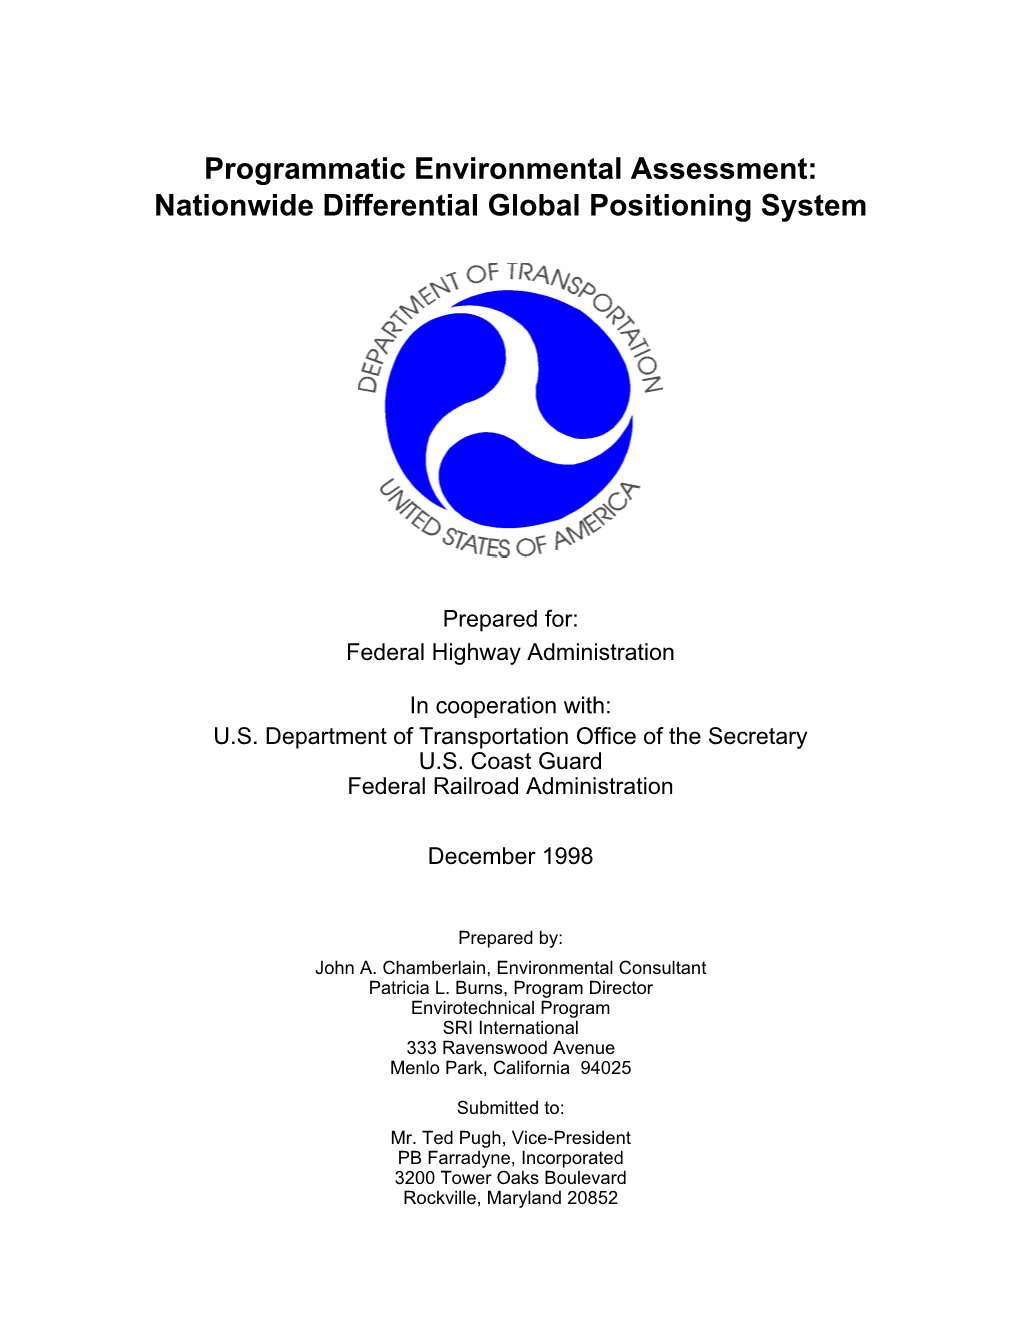 Programmatic Environmental Assessment: Nationwide Differential Global Positioning System